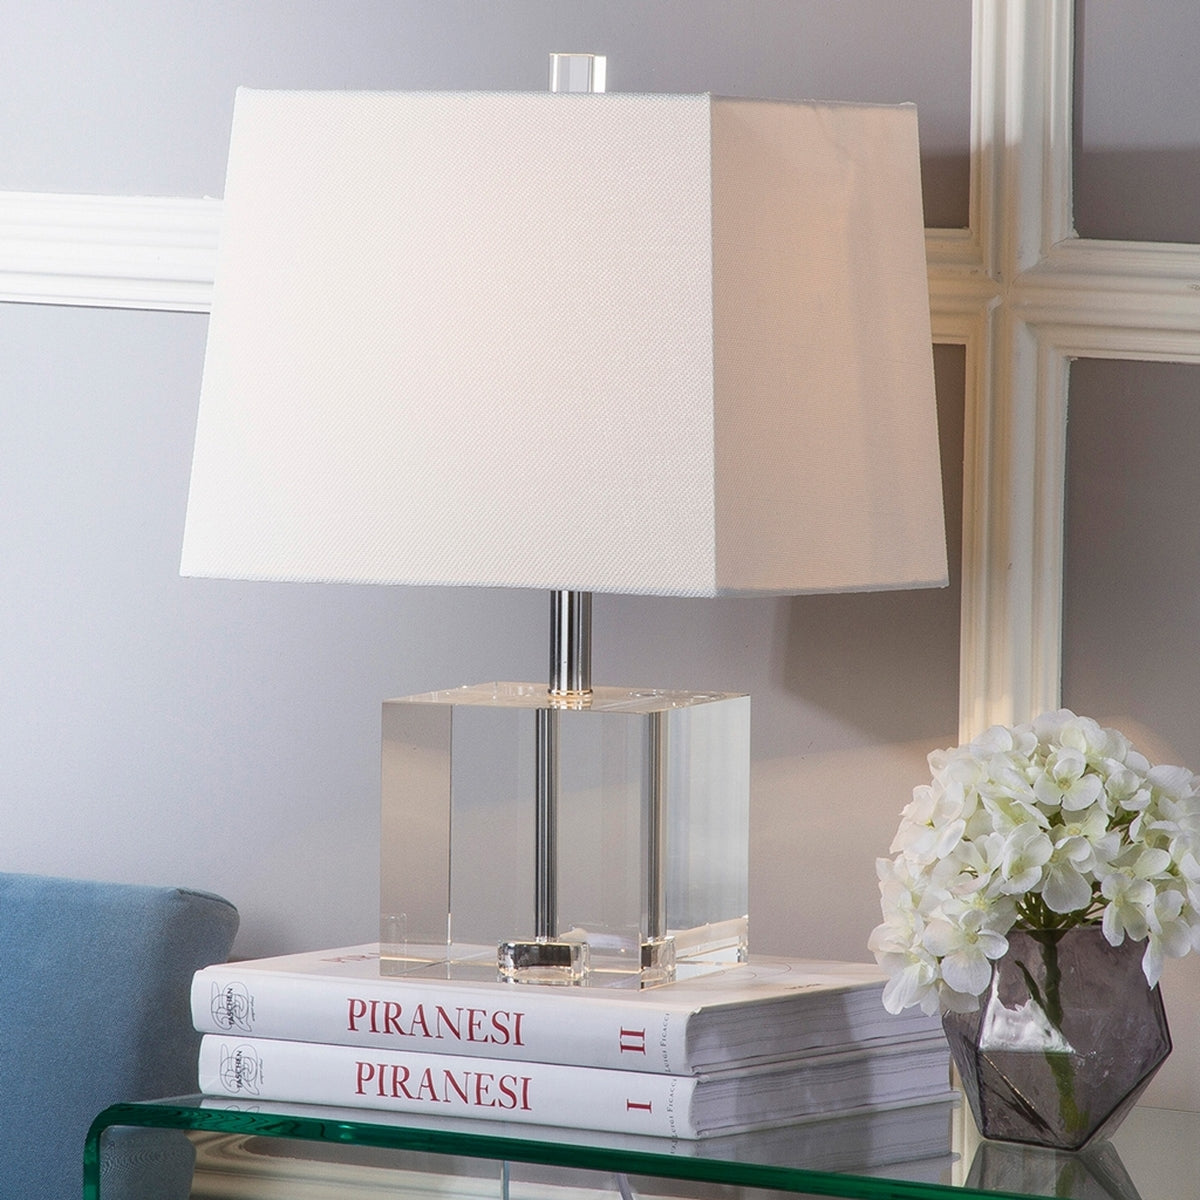 Crystal Block Clear Mini Table Lamp by Kevin Francis Design | Luxury Home Decor